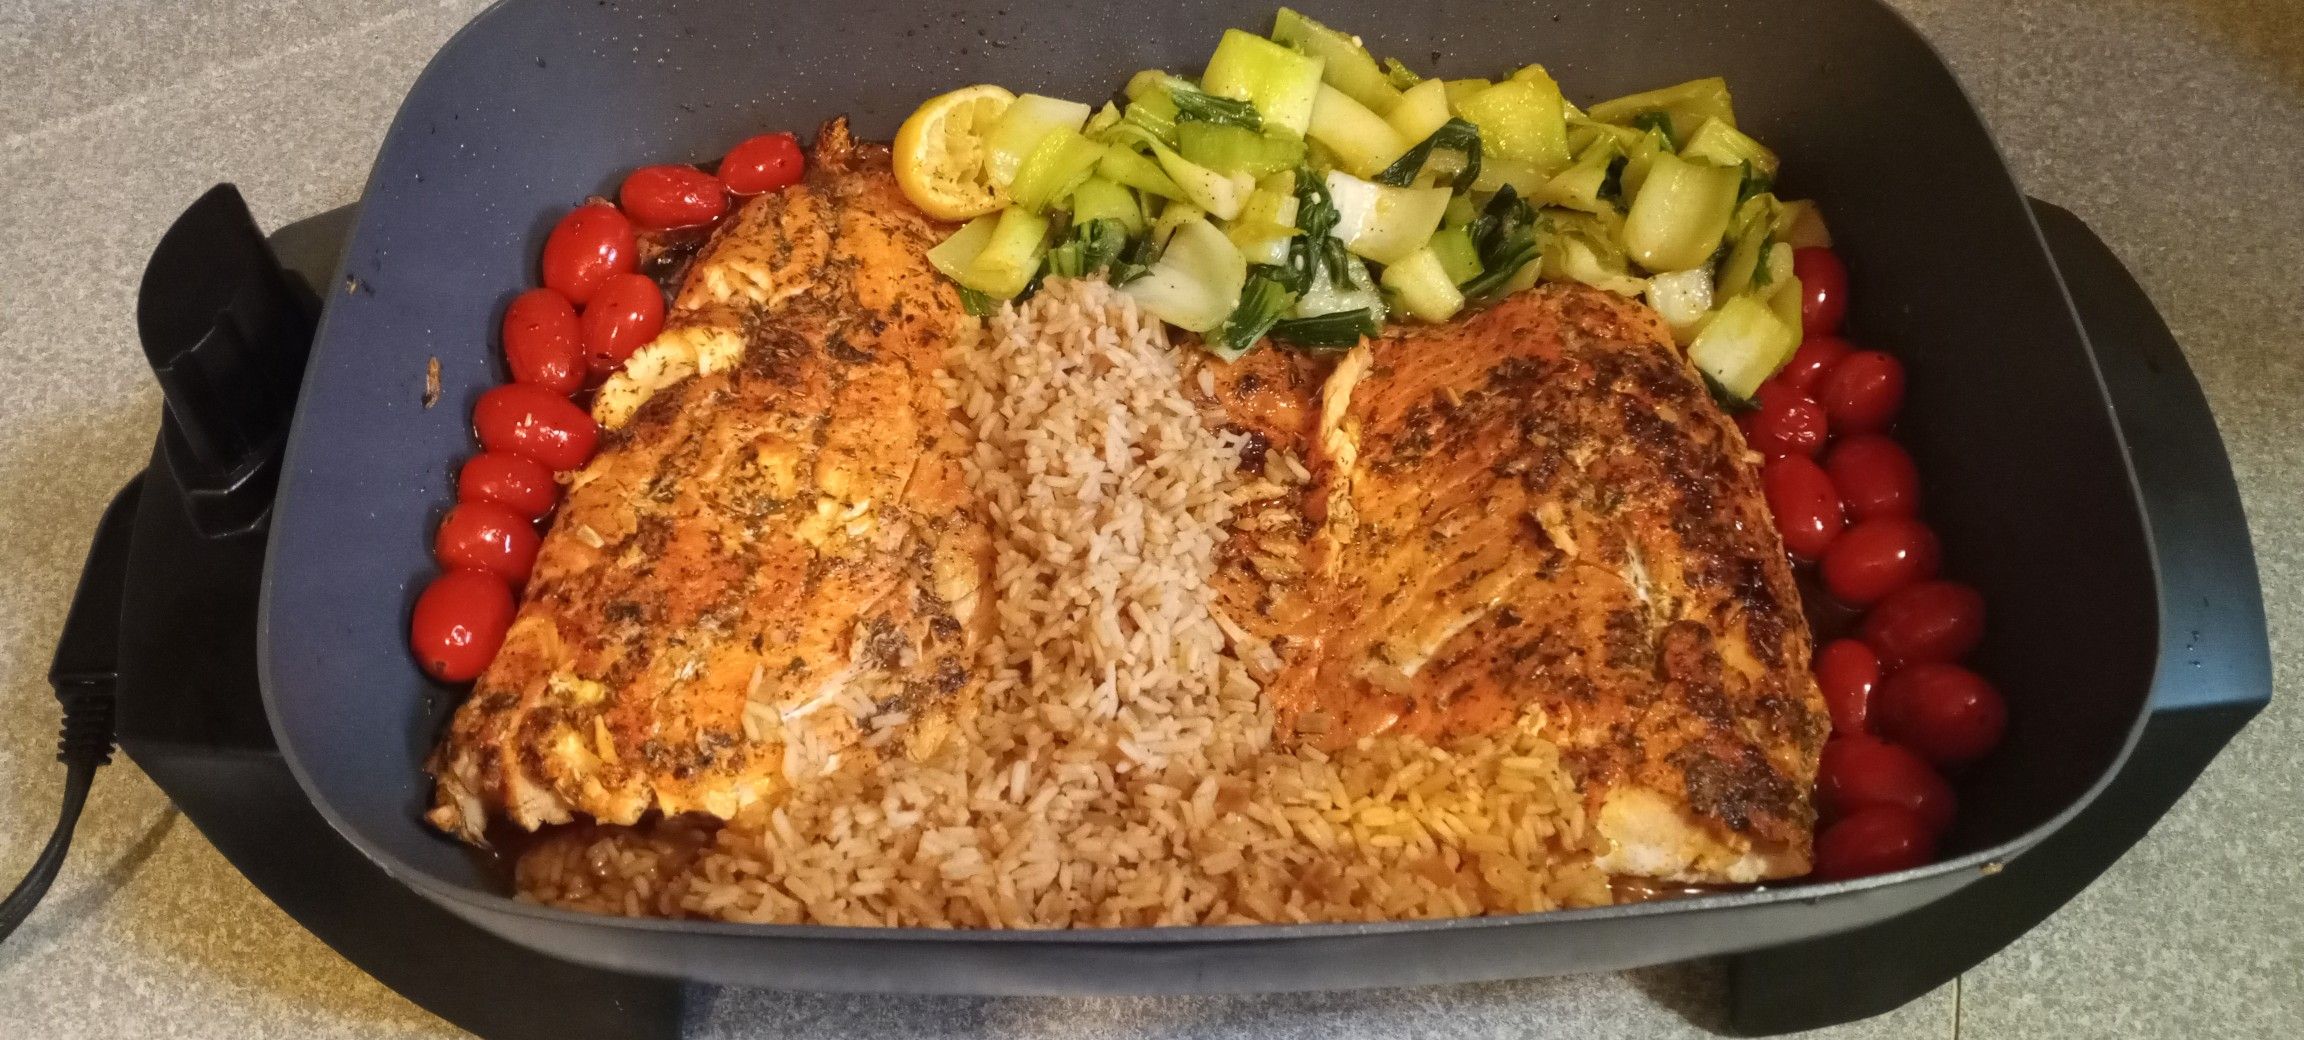 https://storables.com/wp-content/uploads/2023/07/how-do-i-make-salmon-in-an-electric-skillet-1690203299.jpg